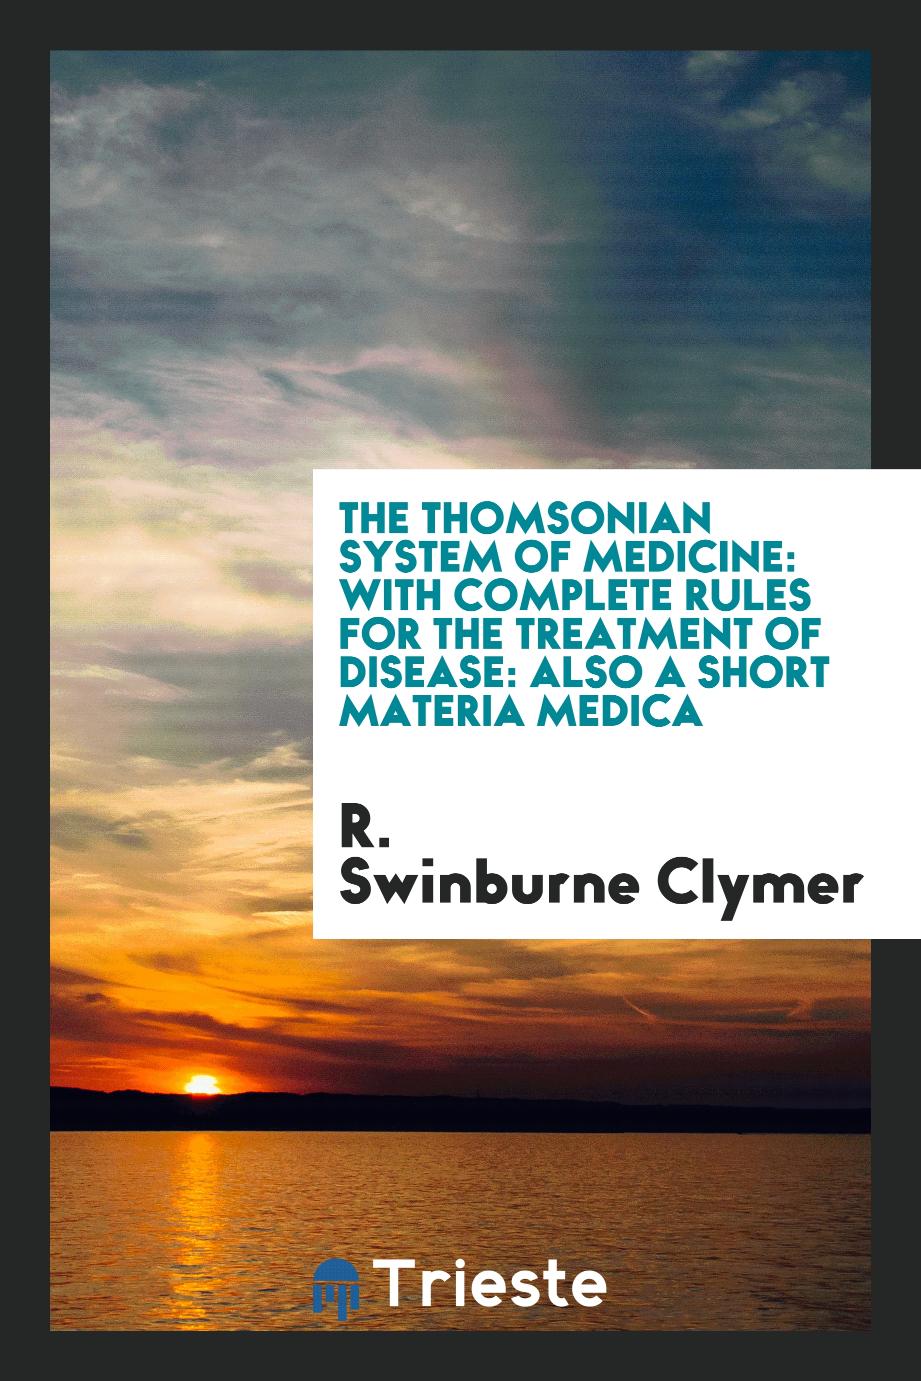 The Thomsonian system of medicine: with complete rules for the treatment of disease: also a short materia medica